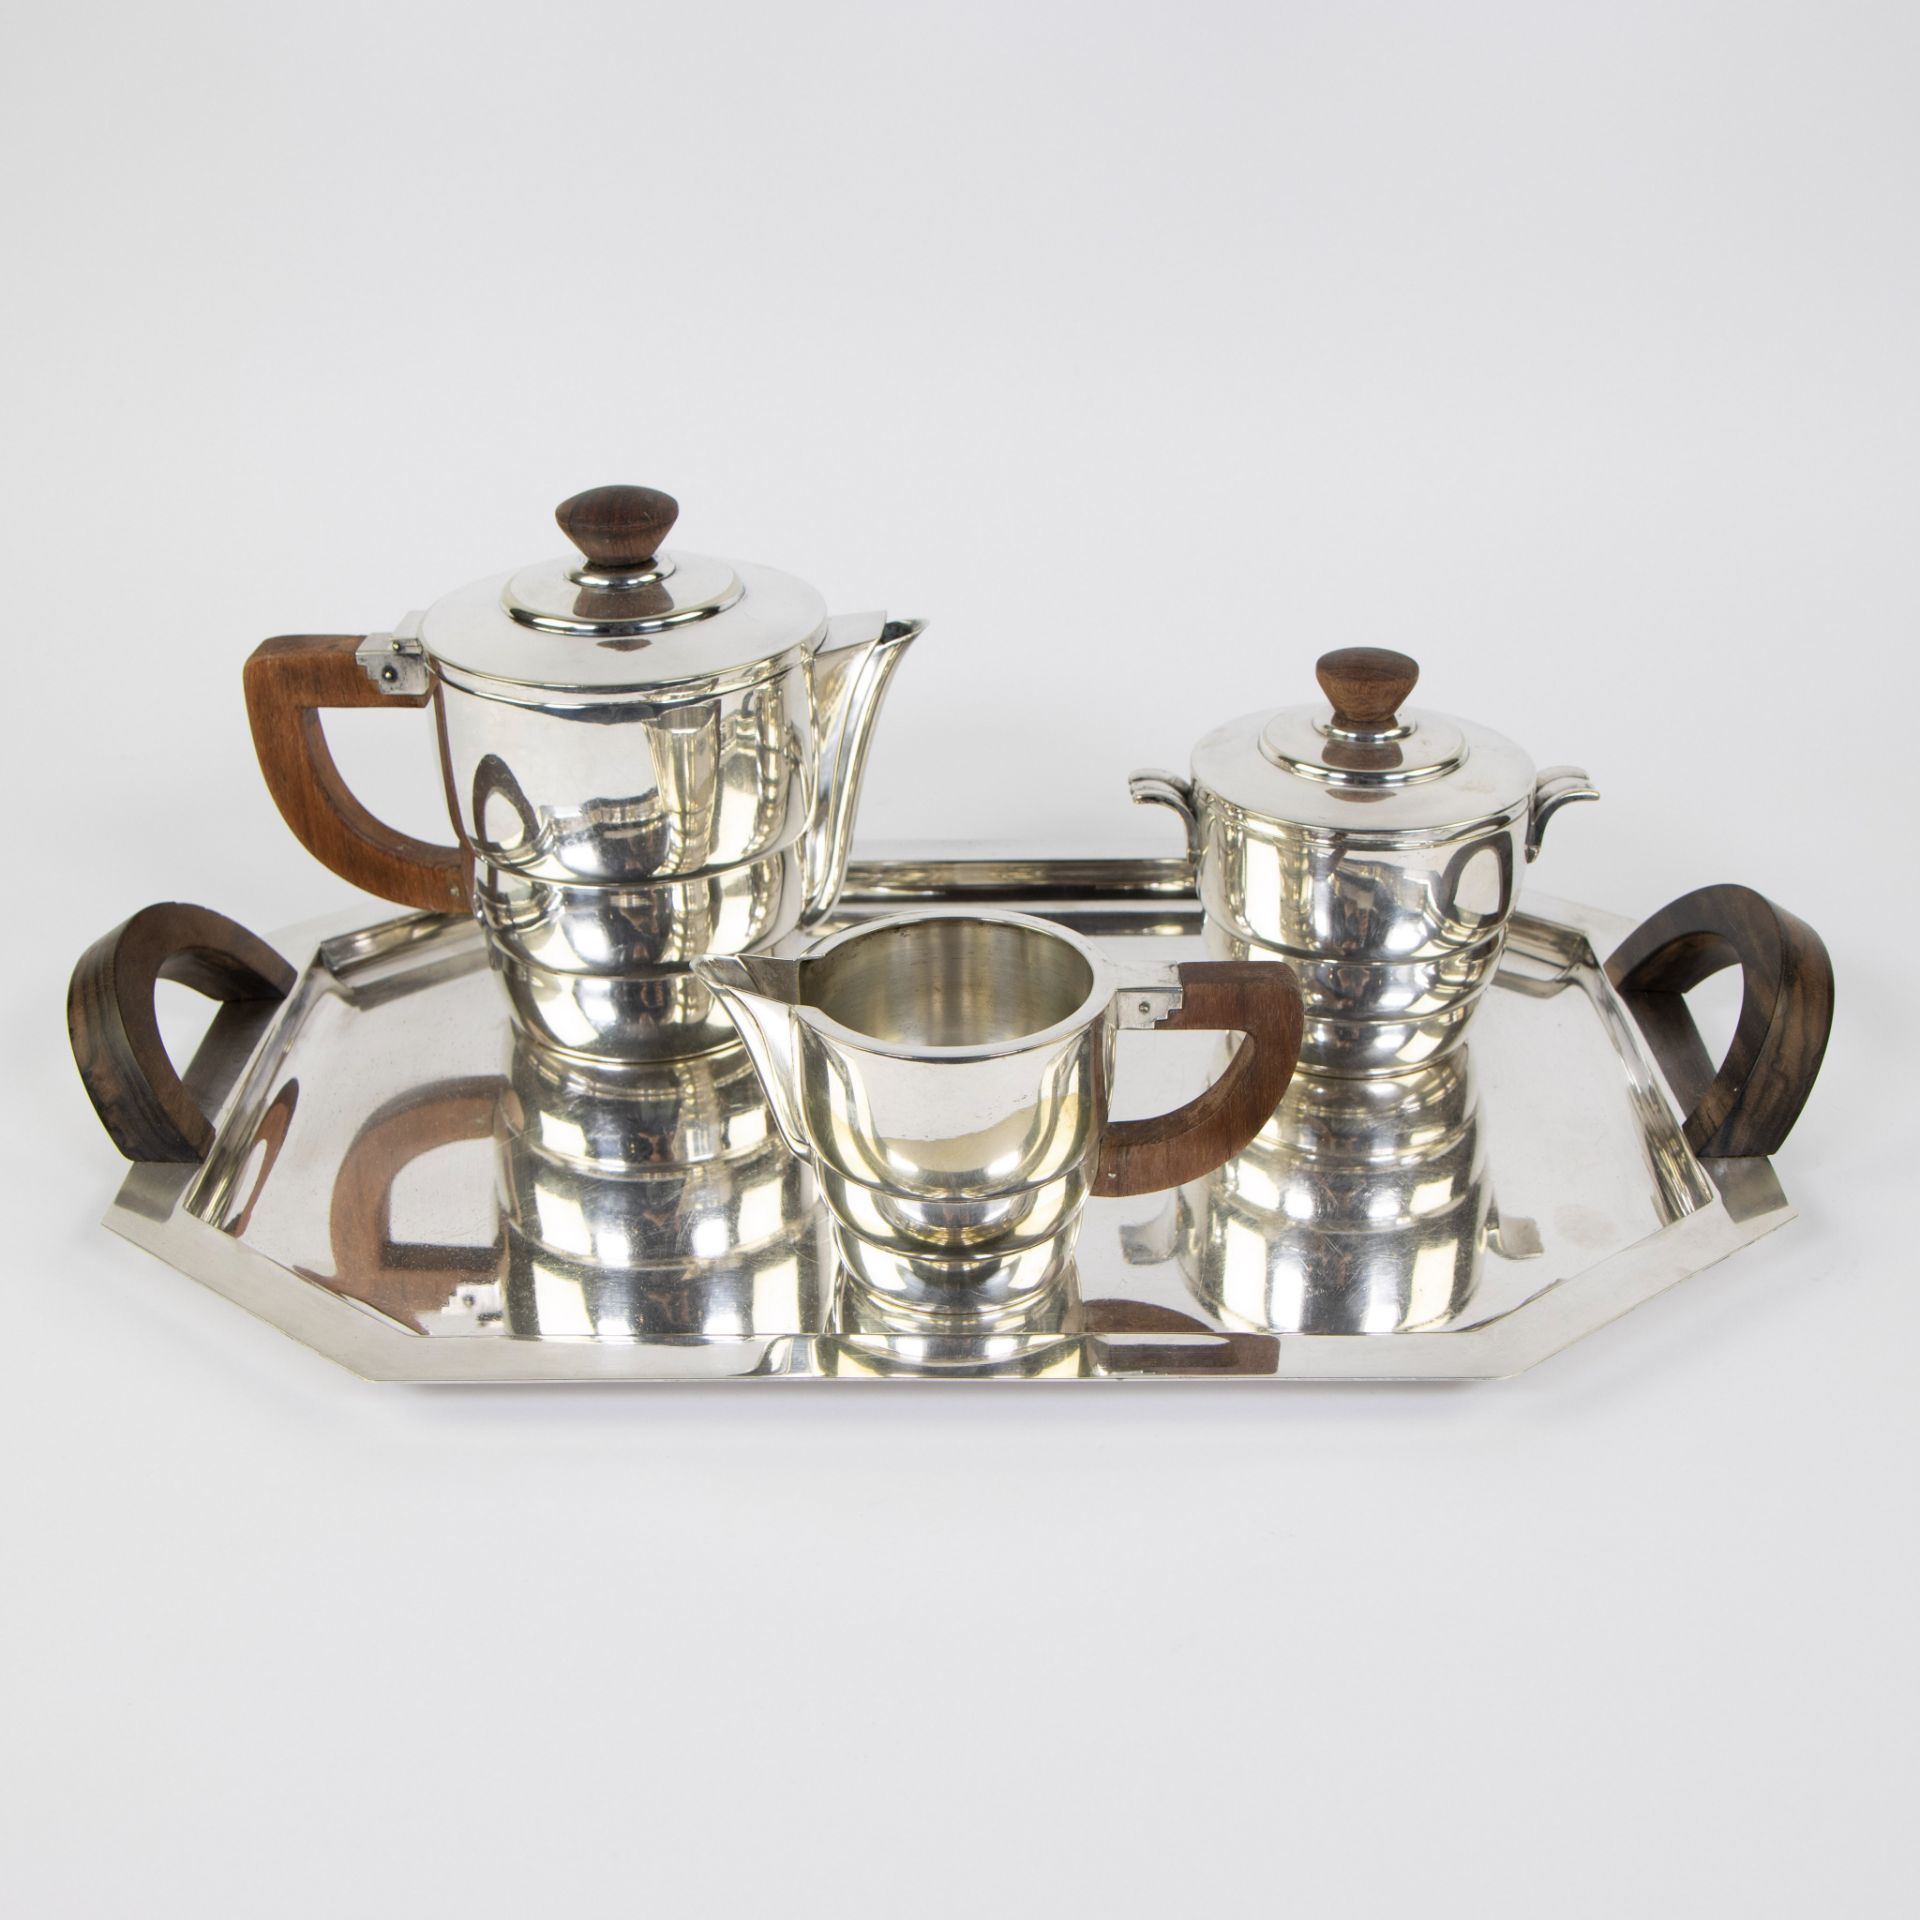 Silvered Art Deco Coffee set, Brussels Charlan